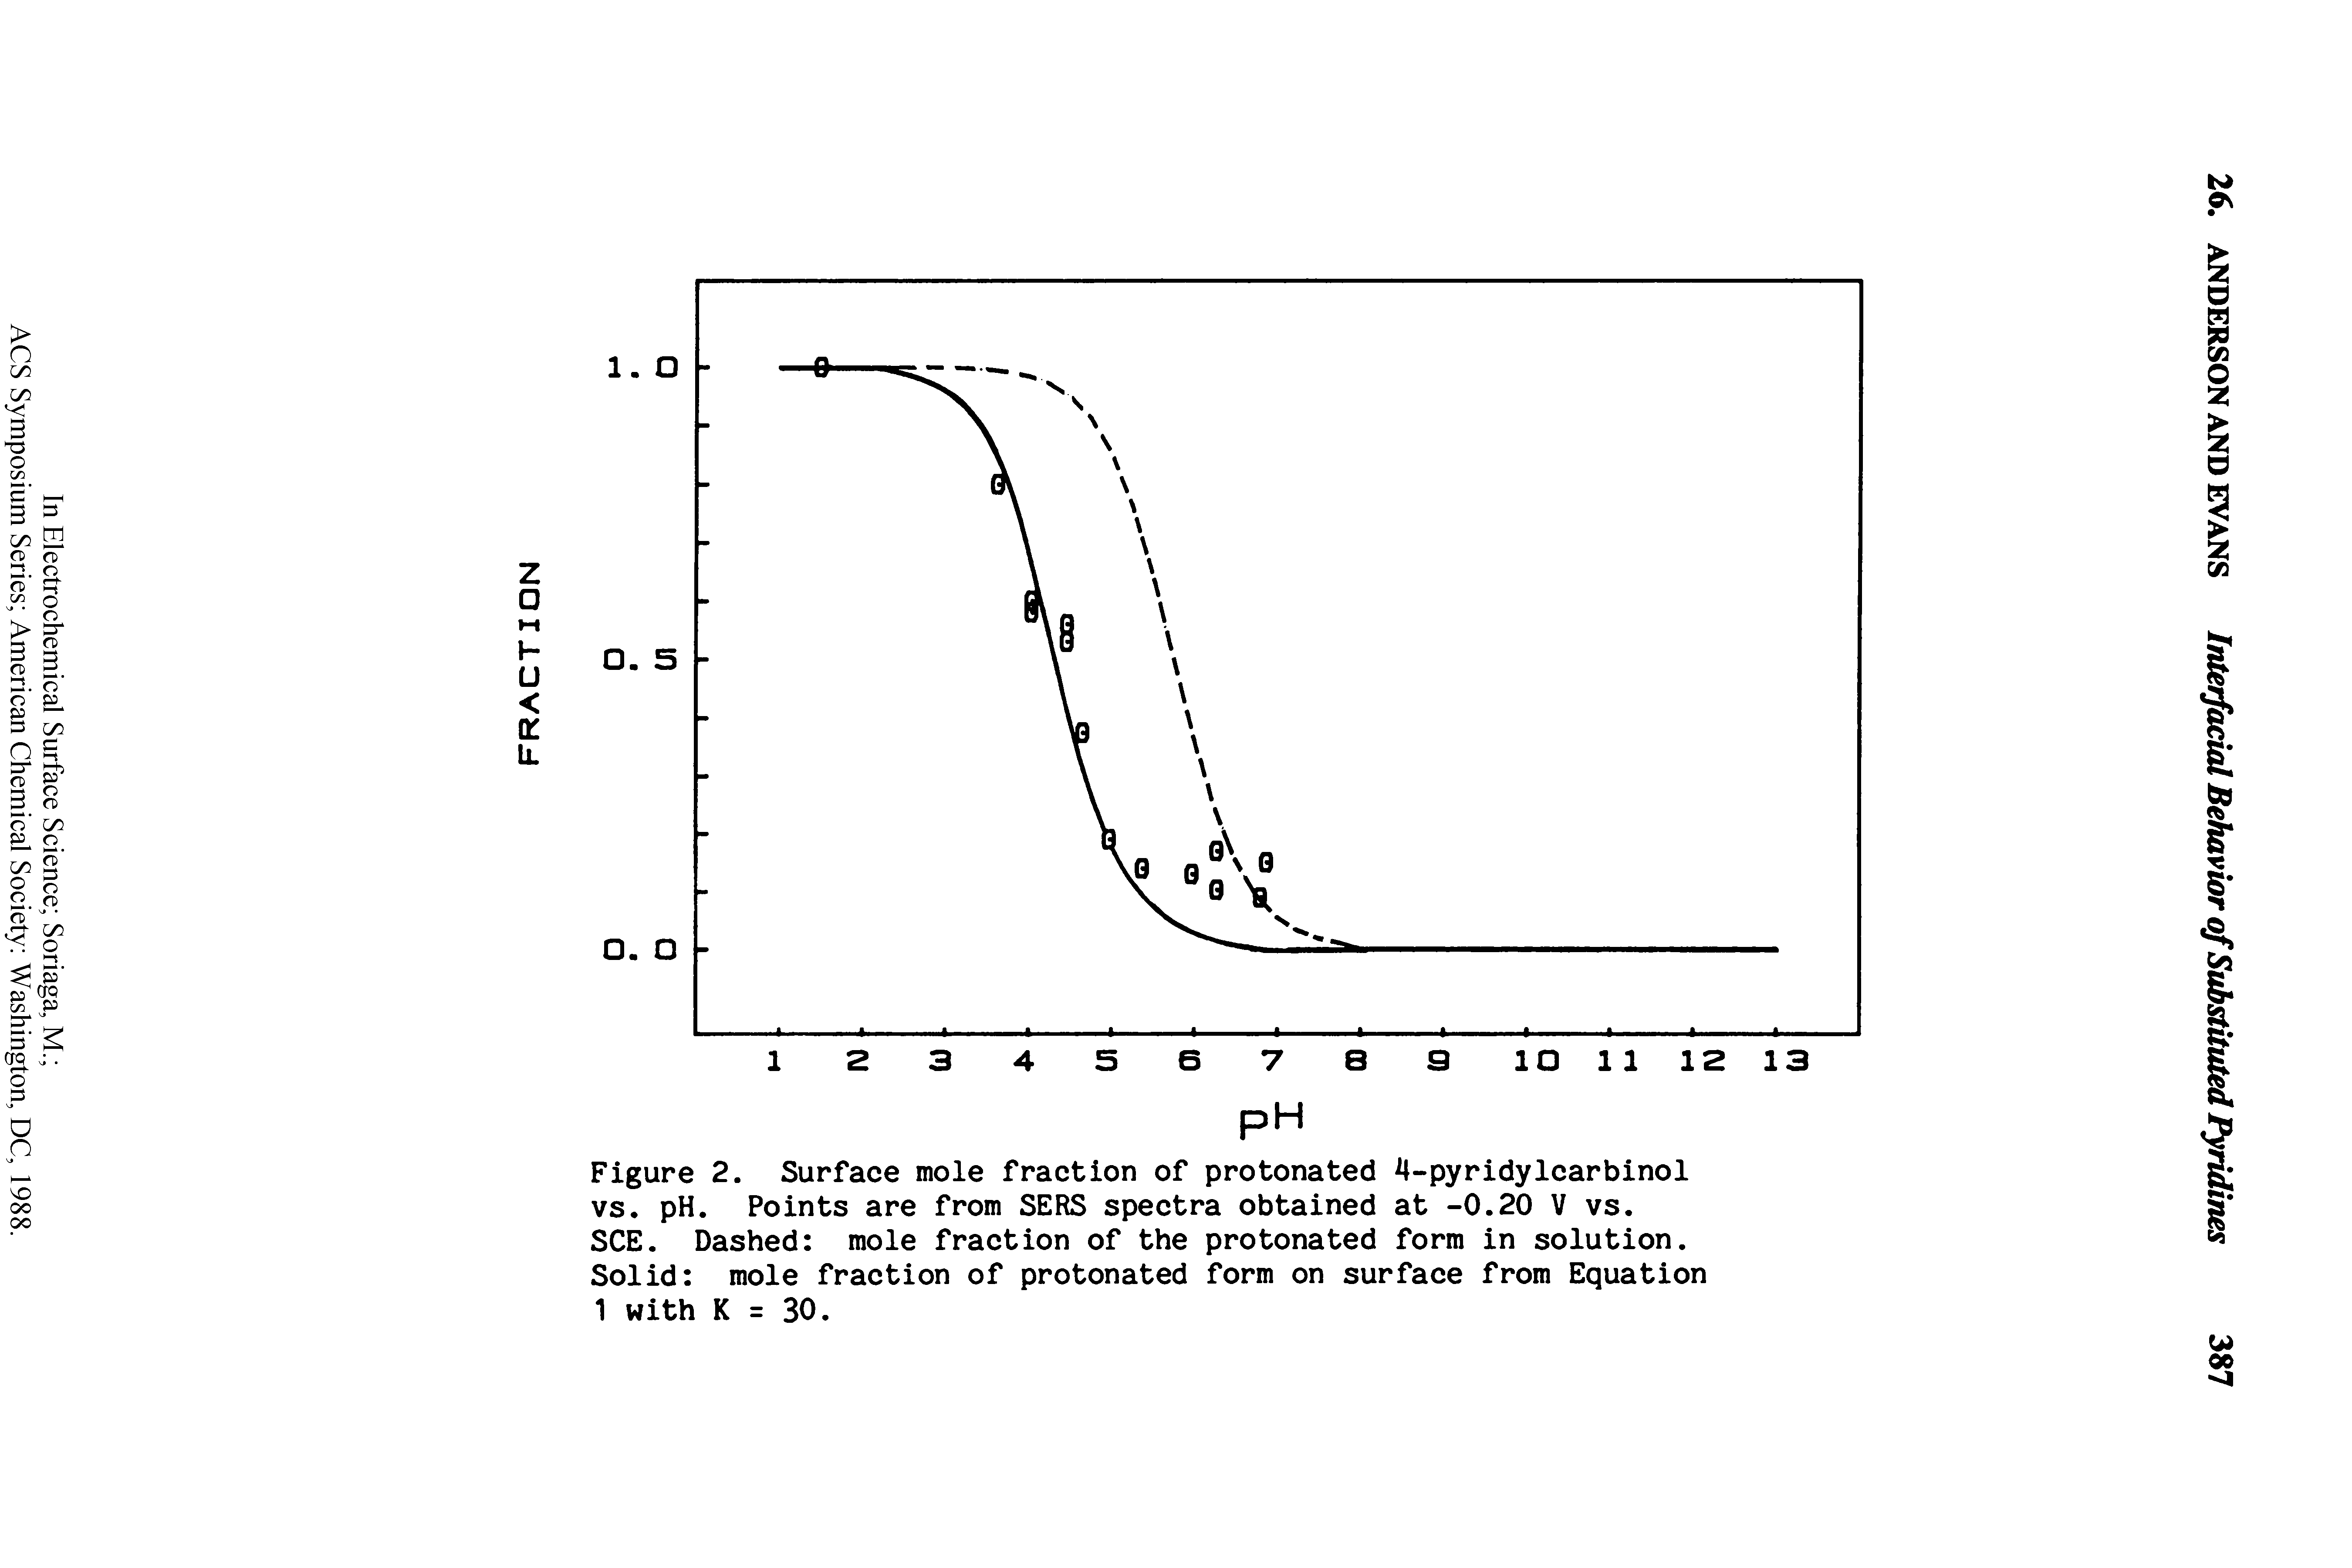 Figure 2. Surface mole fraction of protonated 4-pyridylcarbinol vs. pH. Points are from SERS spectra obtained at -0.20 V vs.